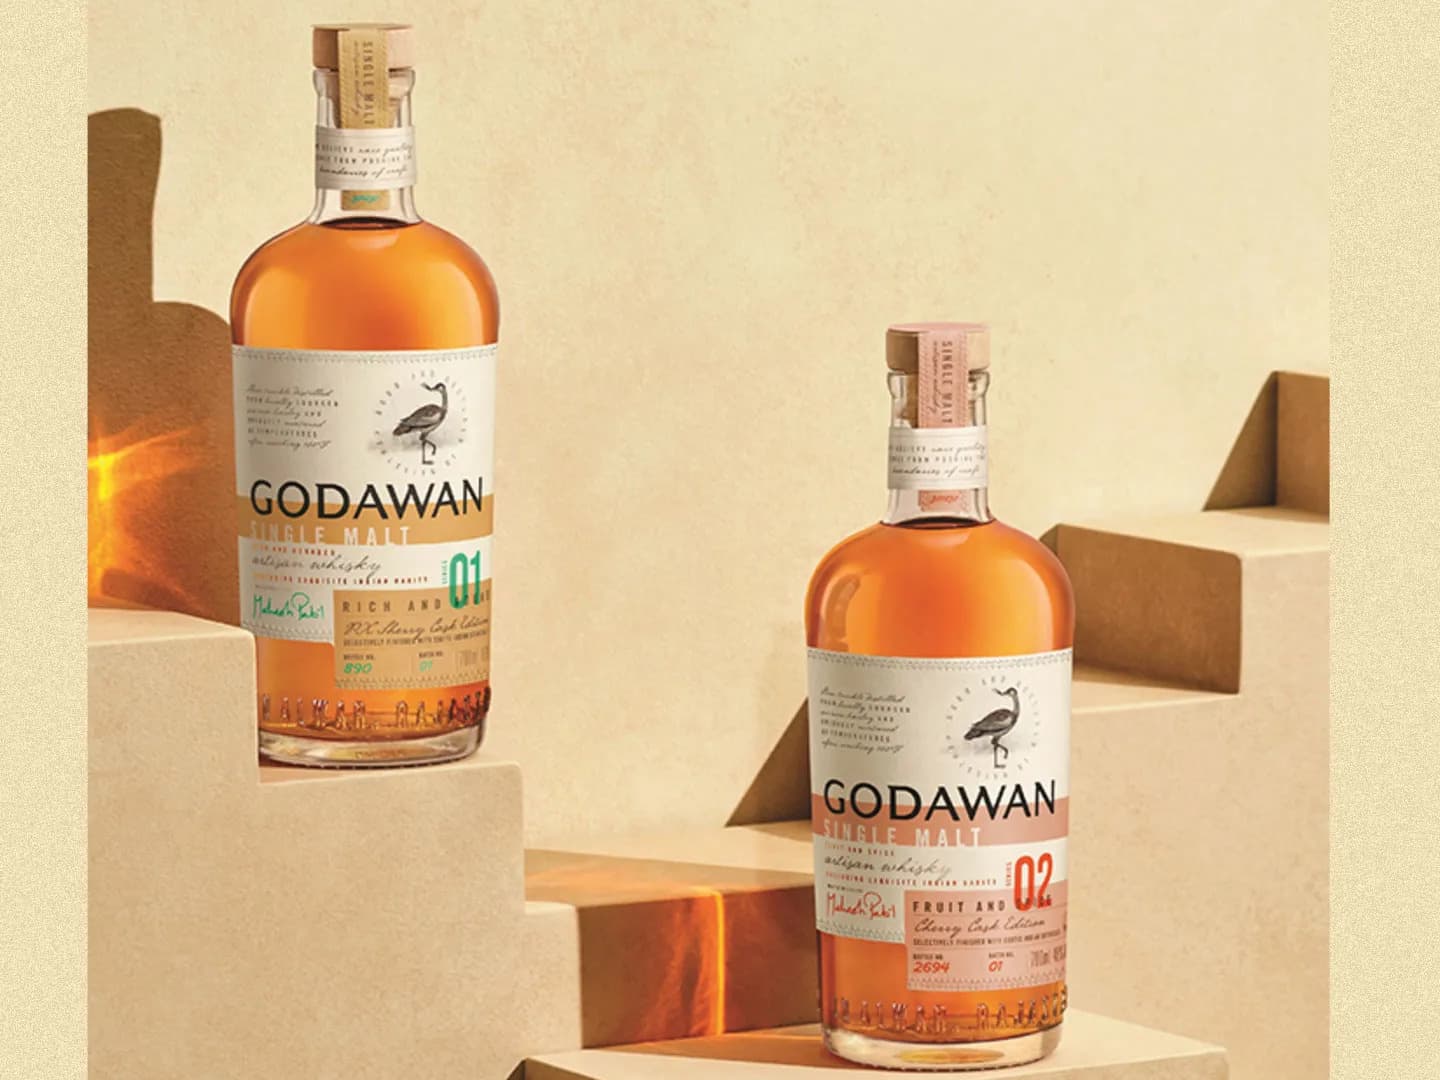 Here’s How To Best Enjoy Godawan When You Want To Sample Some Delicious Tipple